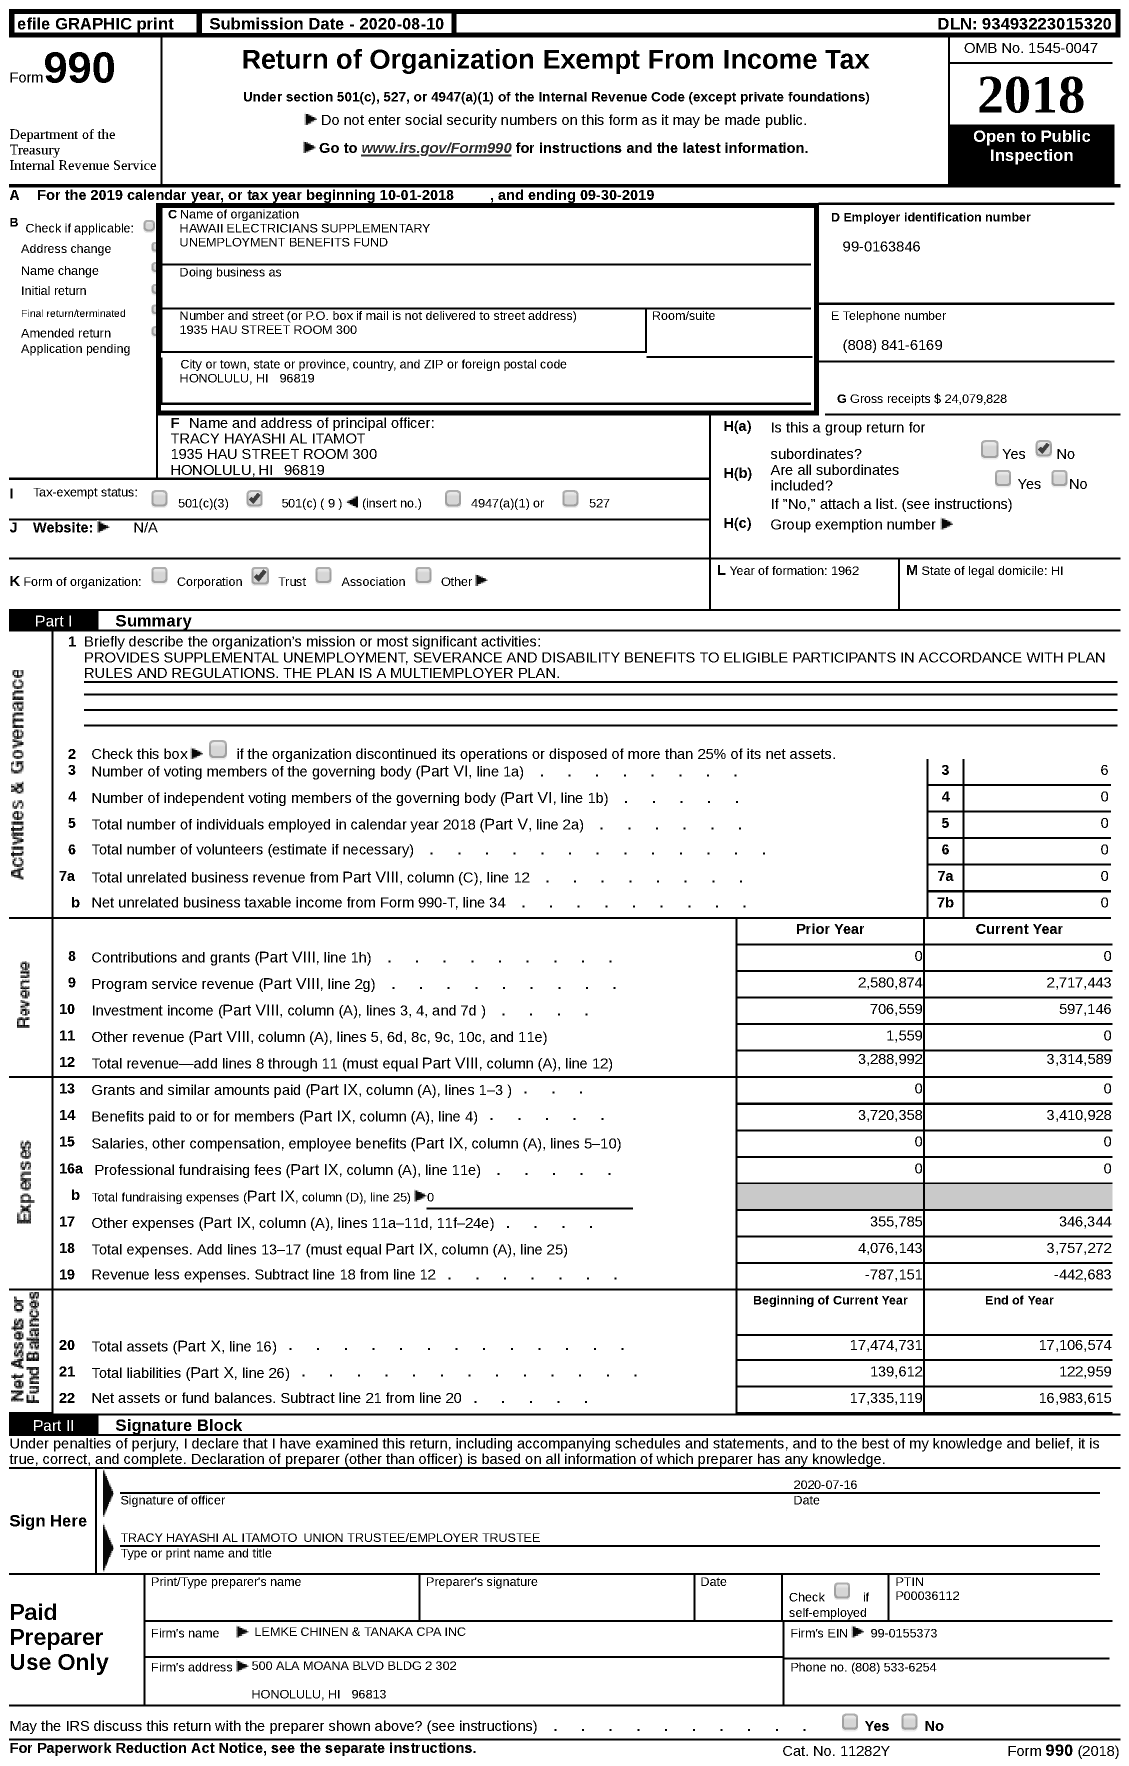 Image of first page of 2018 Form 990 for Hawaii Electricians Supplementary Unemployment Benefits Fund